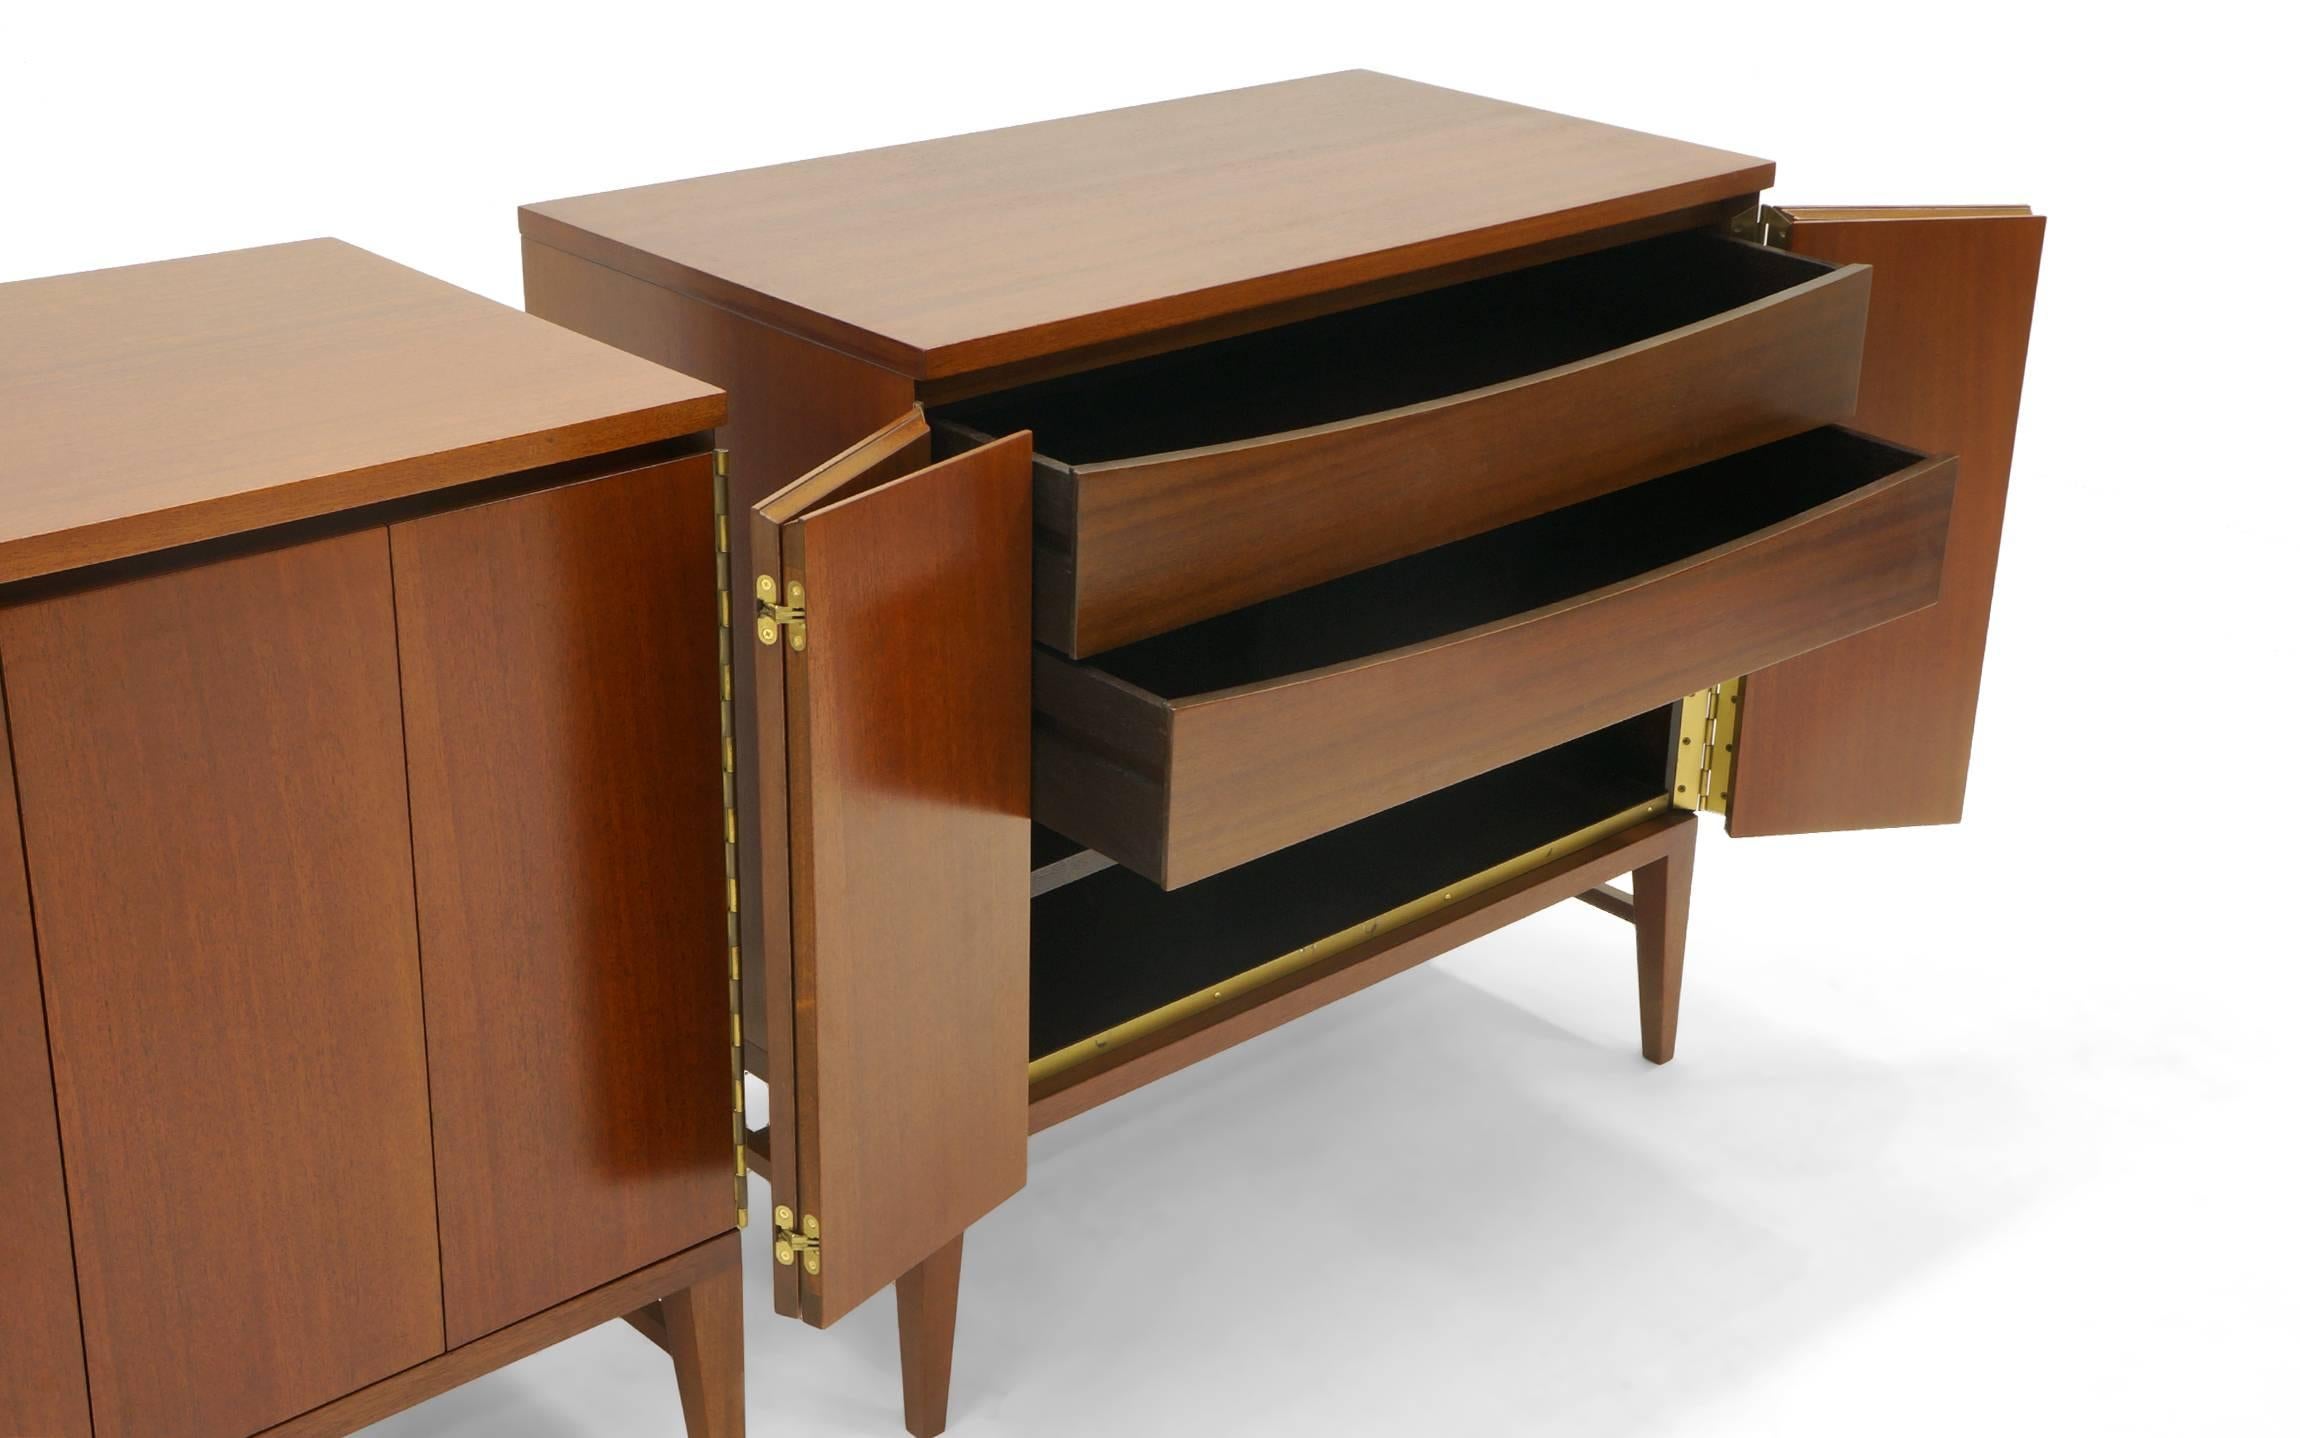 Mid-20th Century Pair of Paul McCobb Storage Cabinets for Use with or Without the Top Section